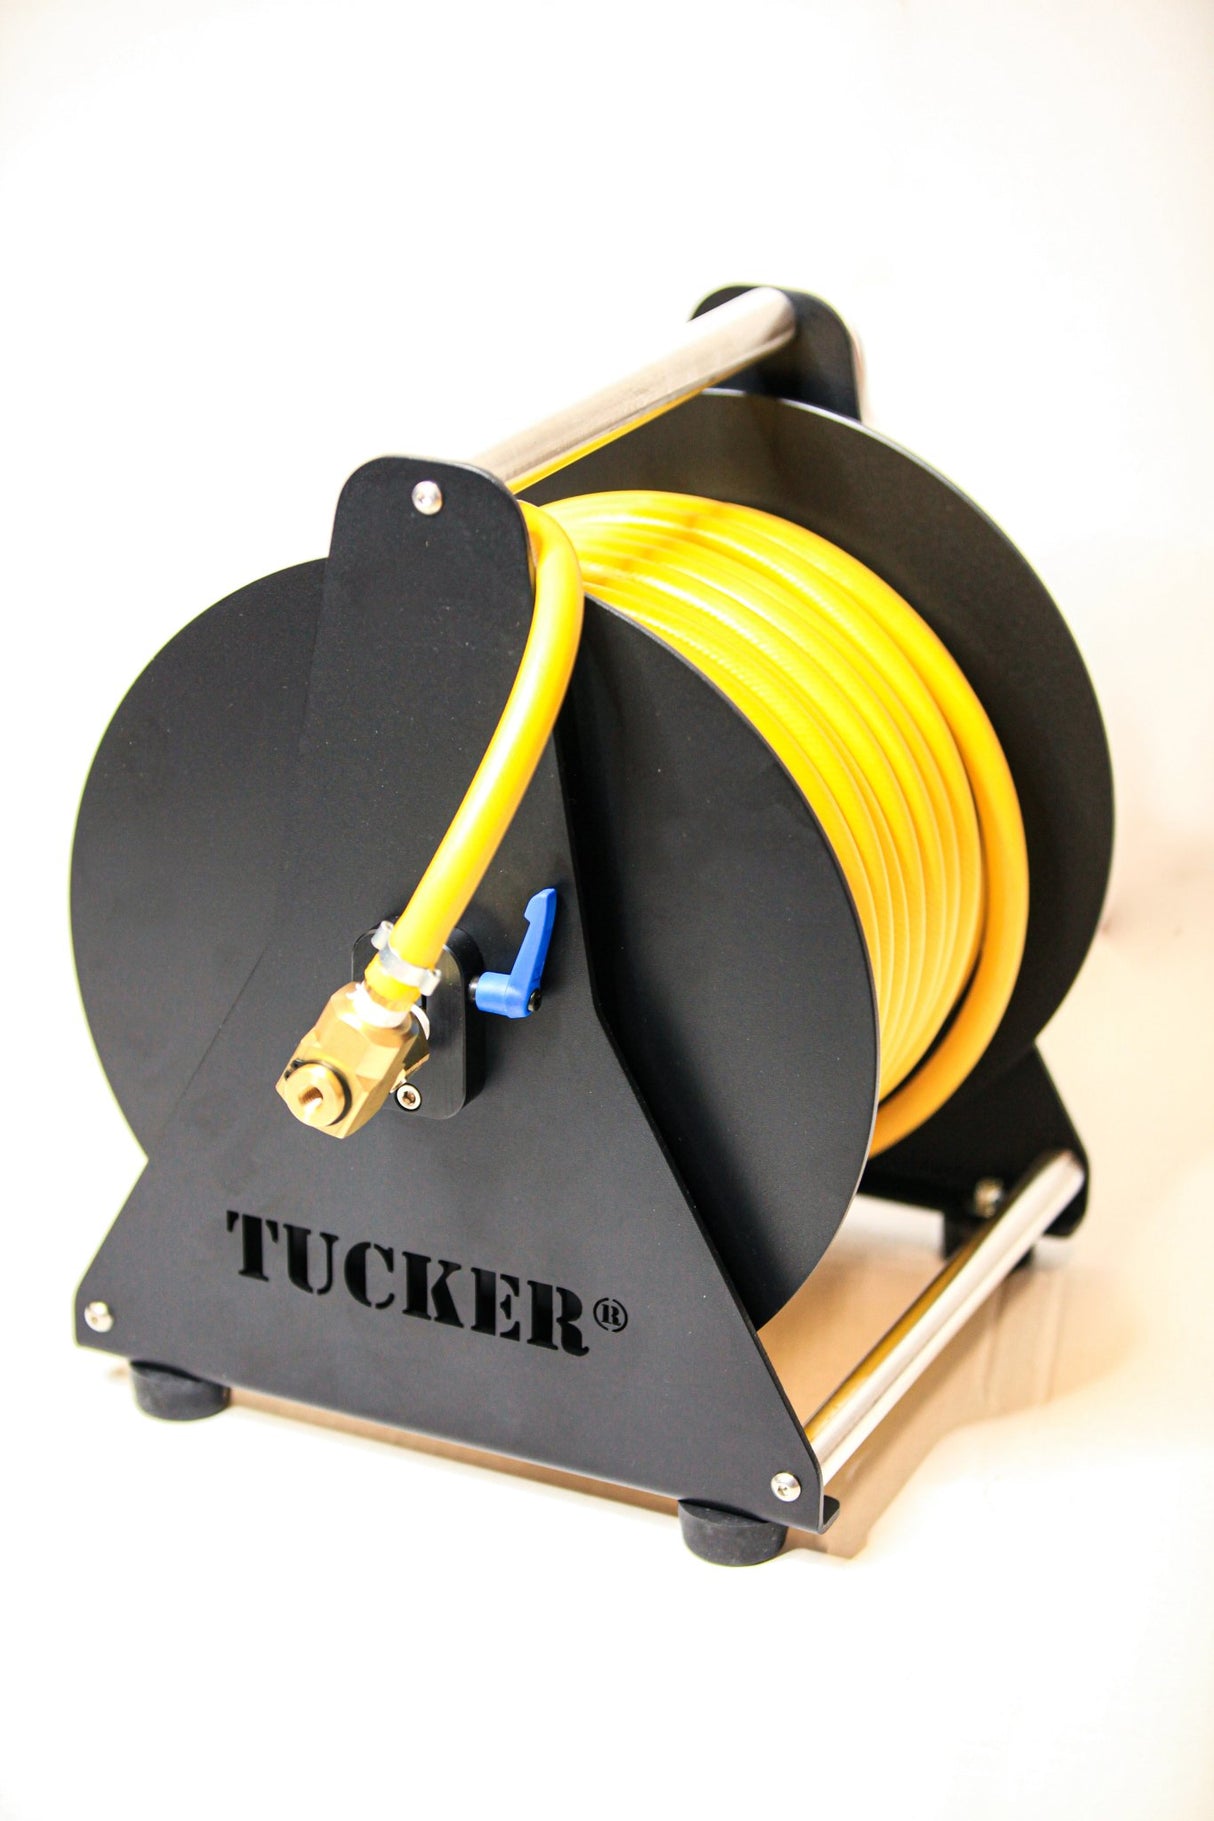 The ULTIMATE Commercial Kit 50' - Tucker® USA#